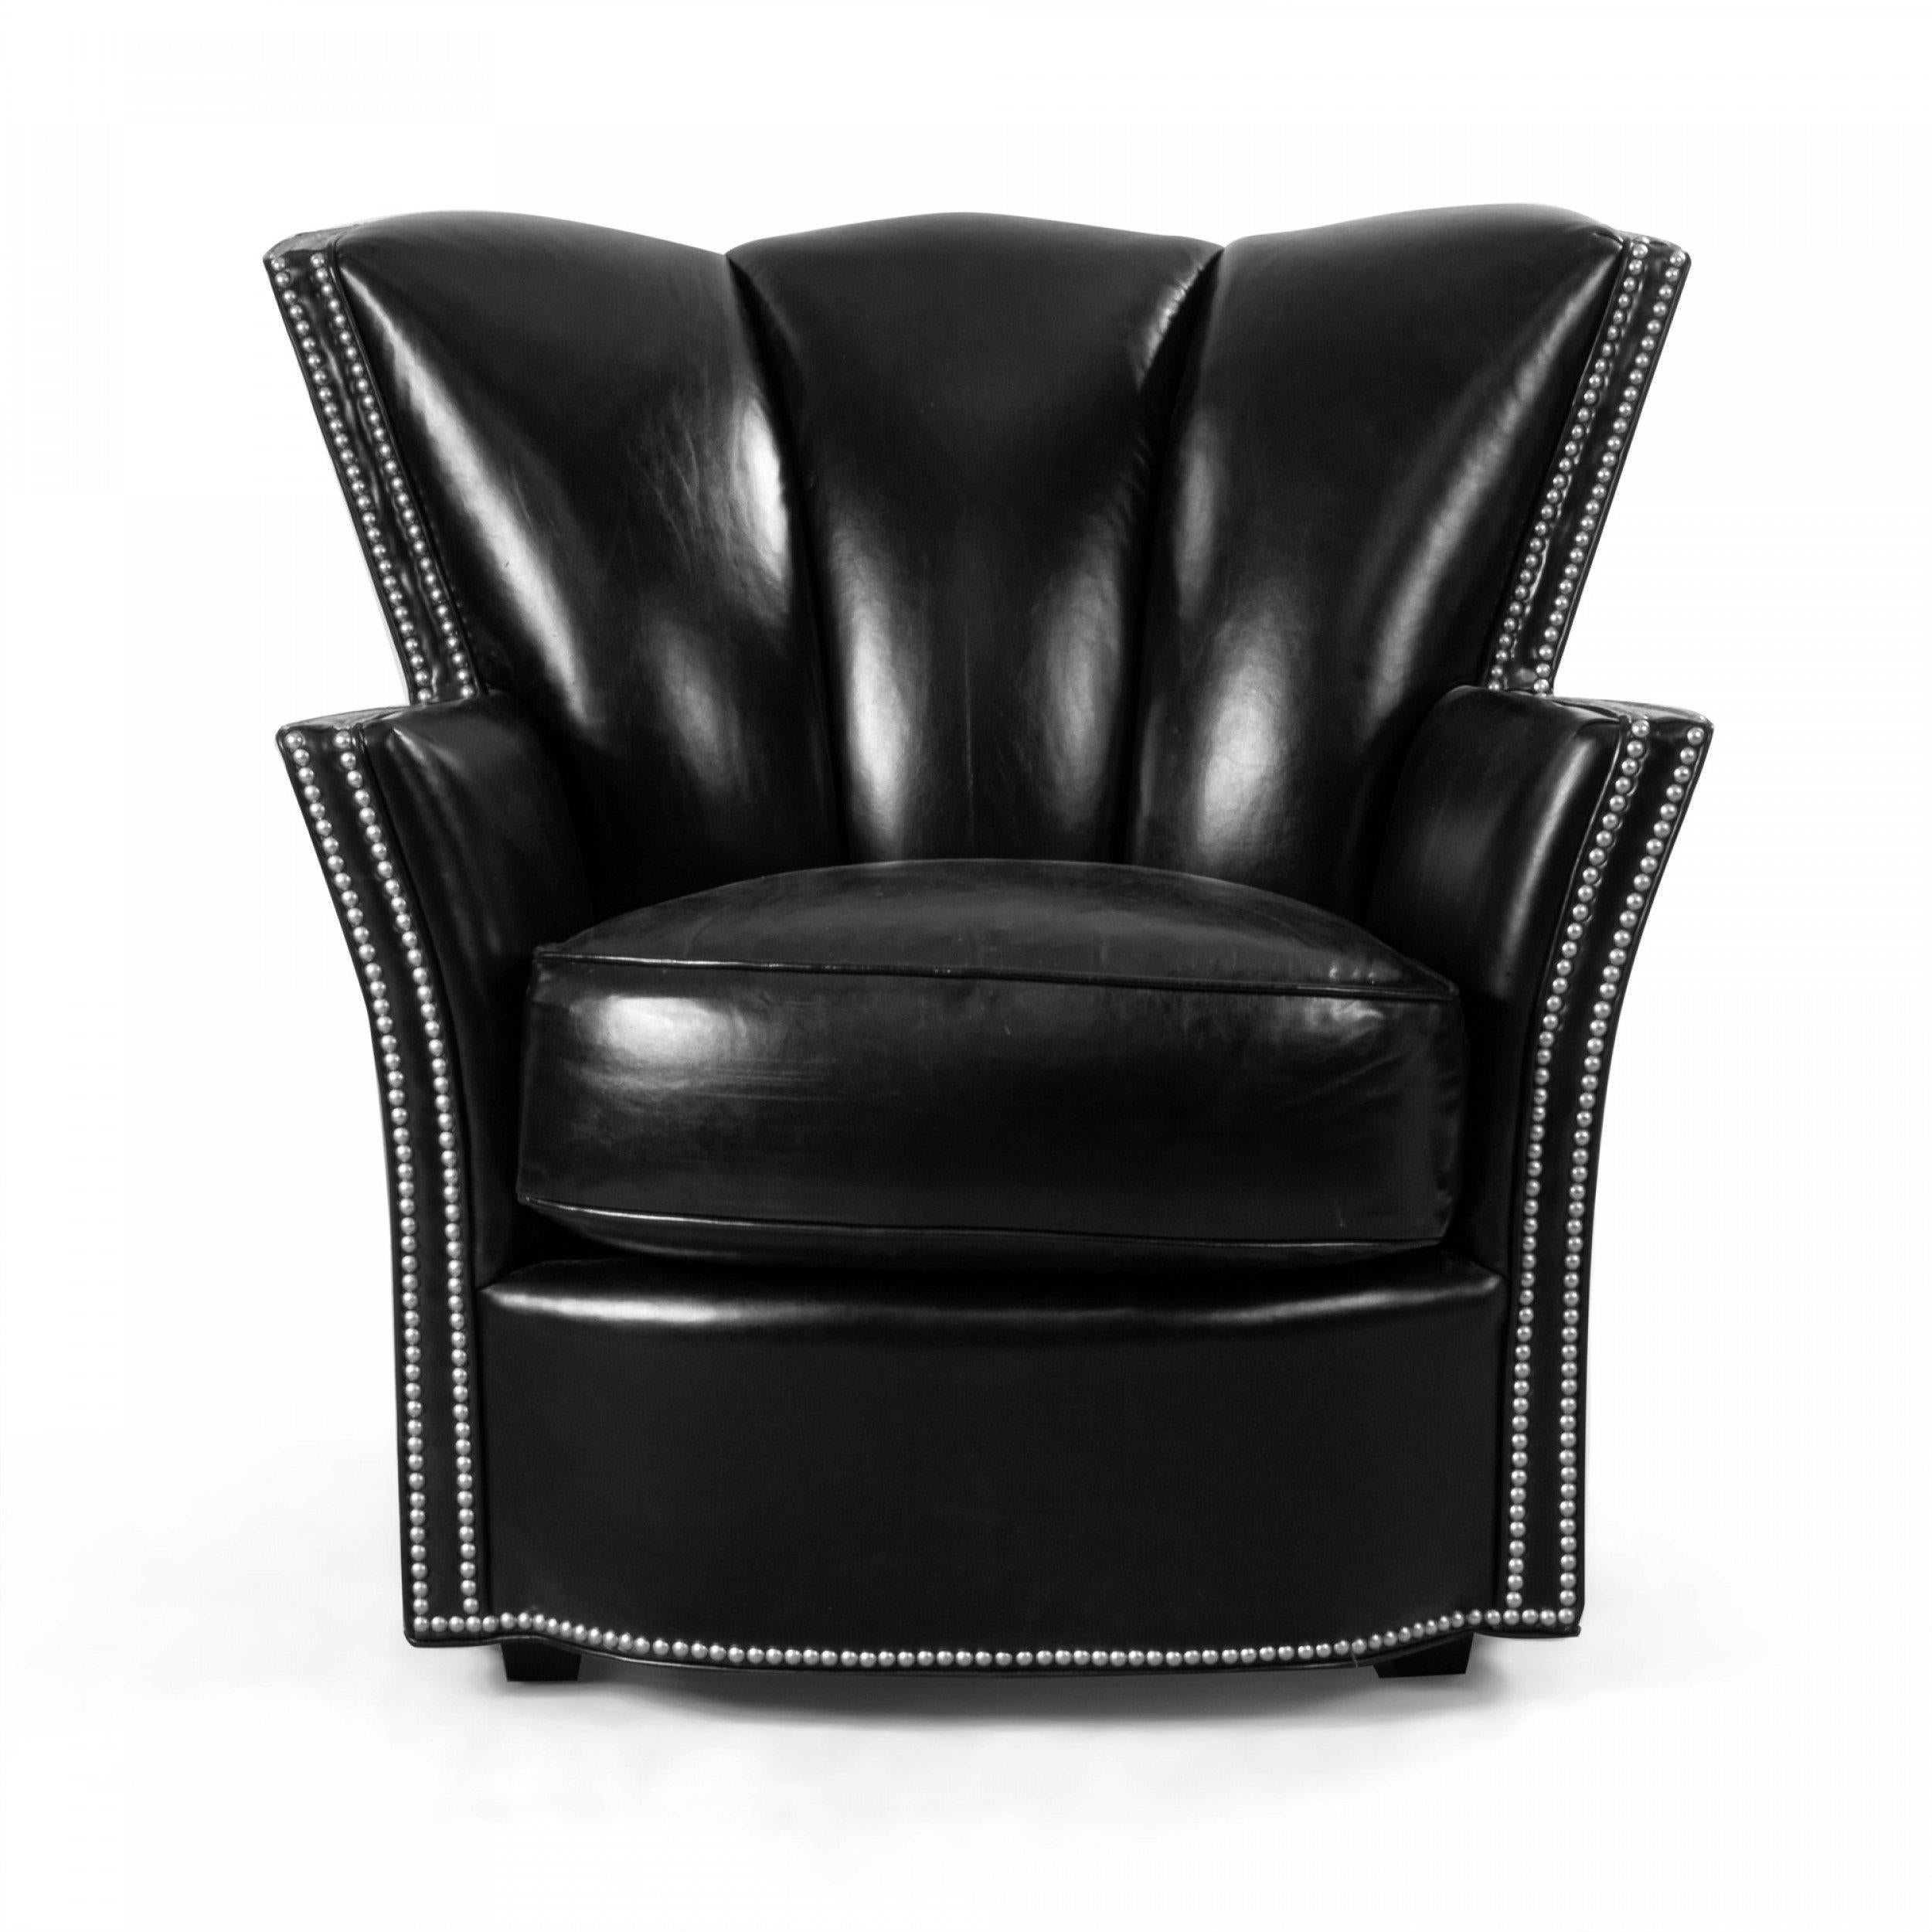 Pair of Contemporary black leather club chairs with thick seat cushions, tufted backs and studded detail along frame and armrests (SWAIM).